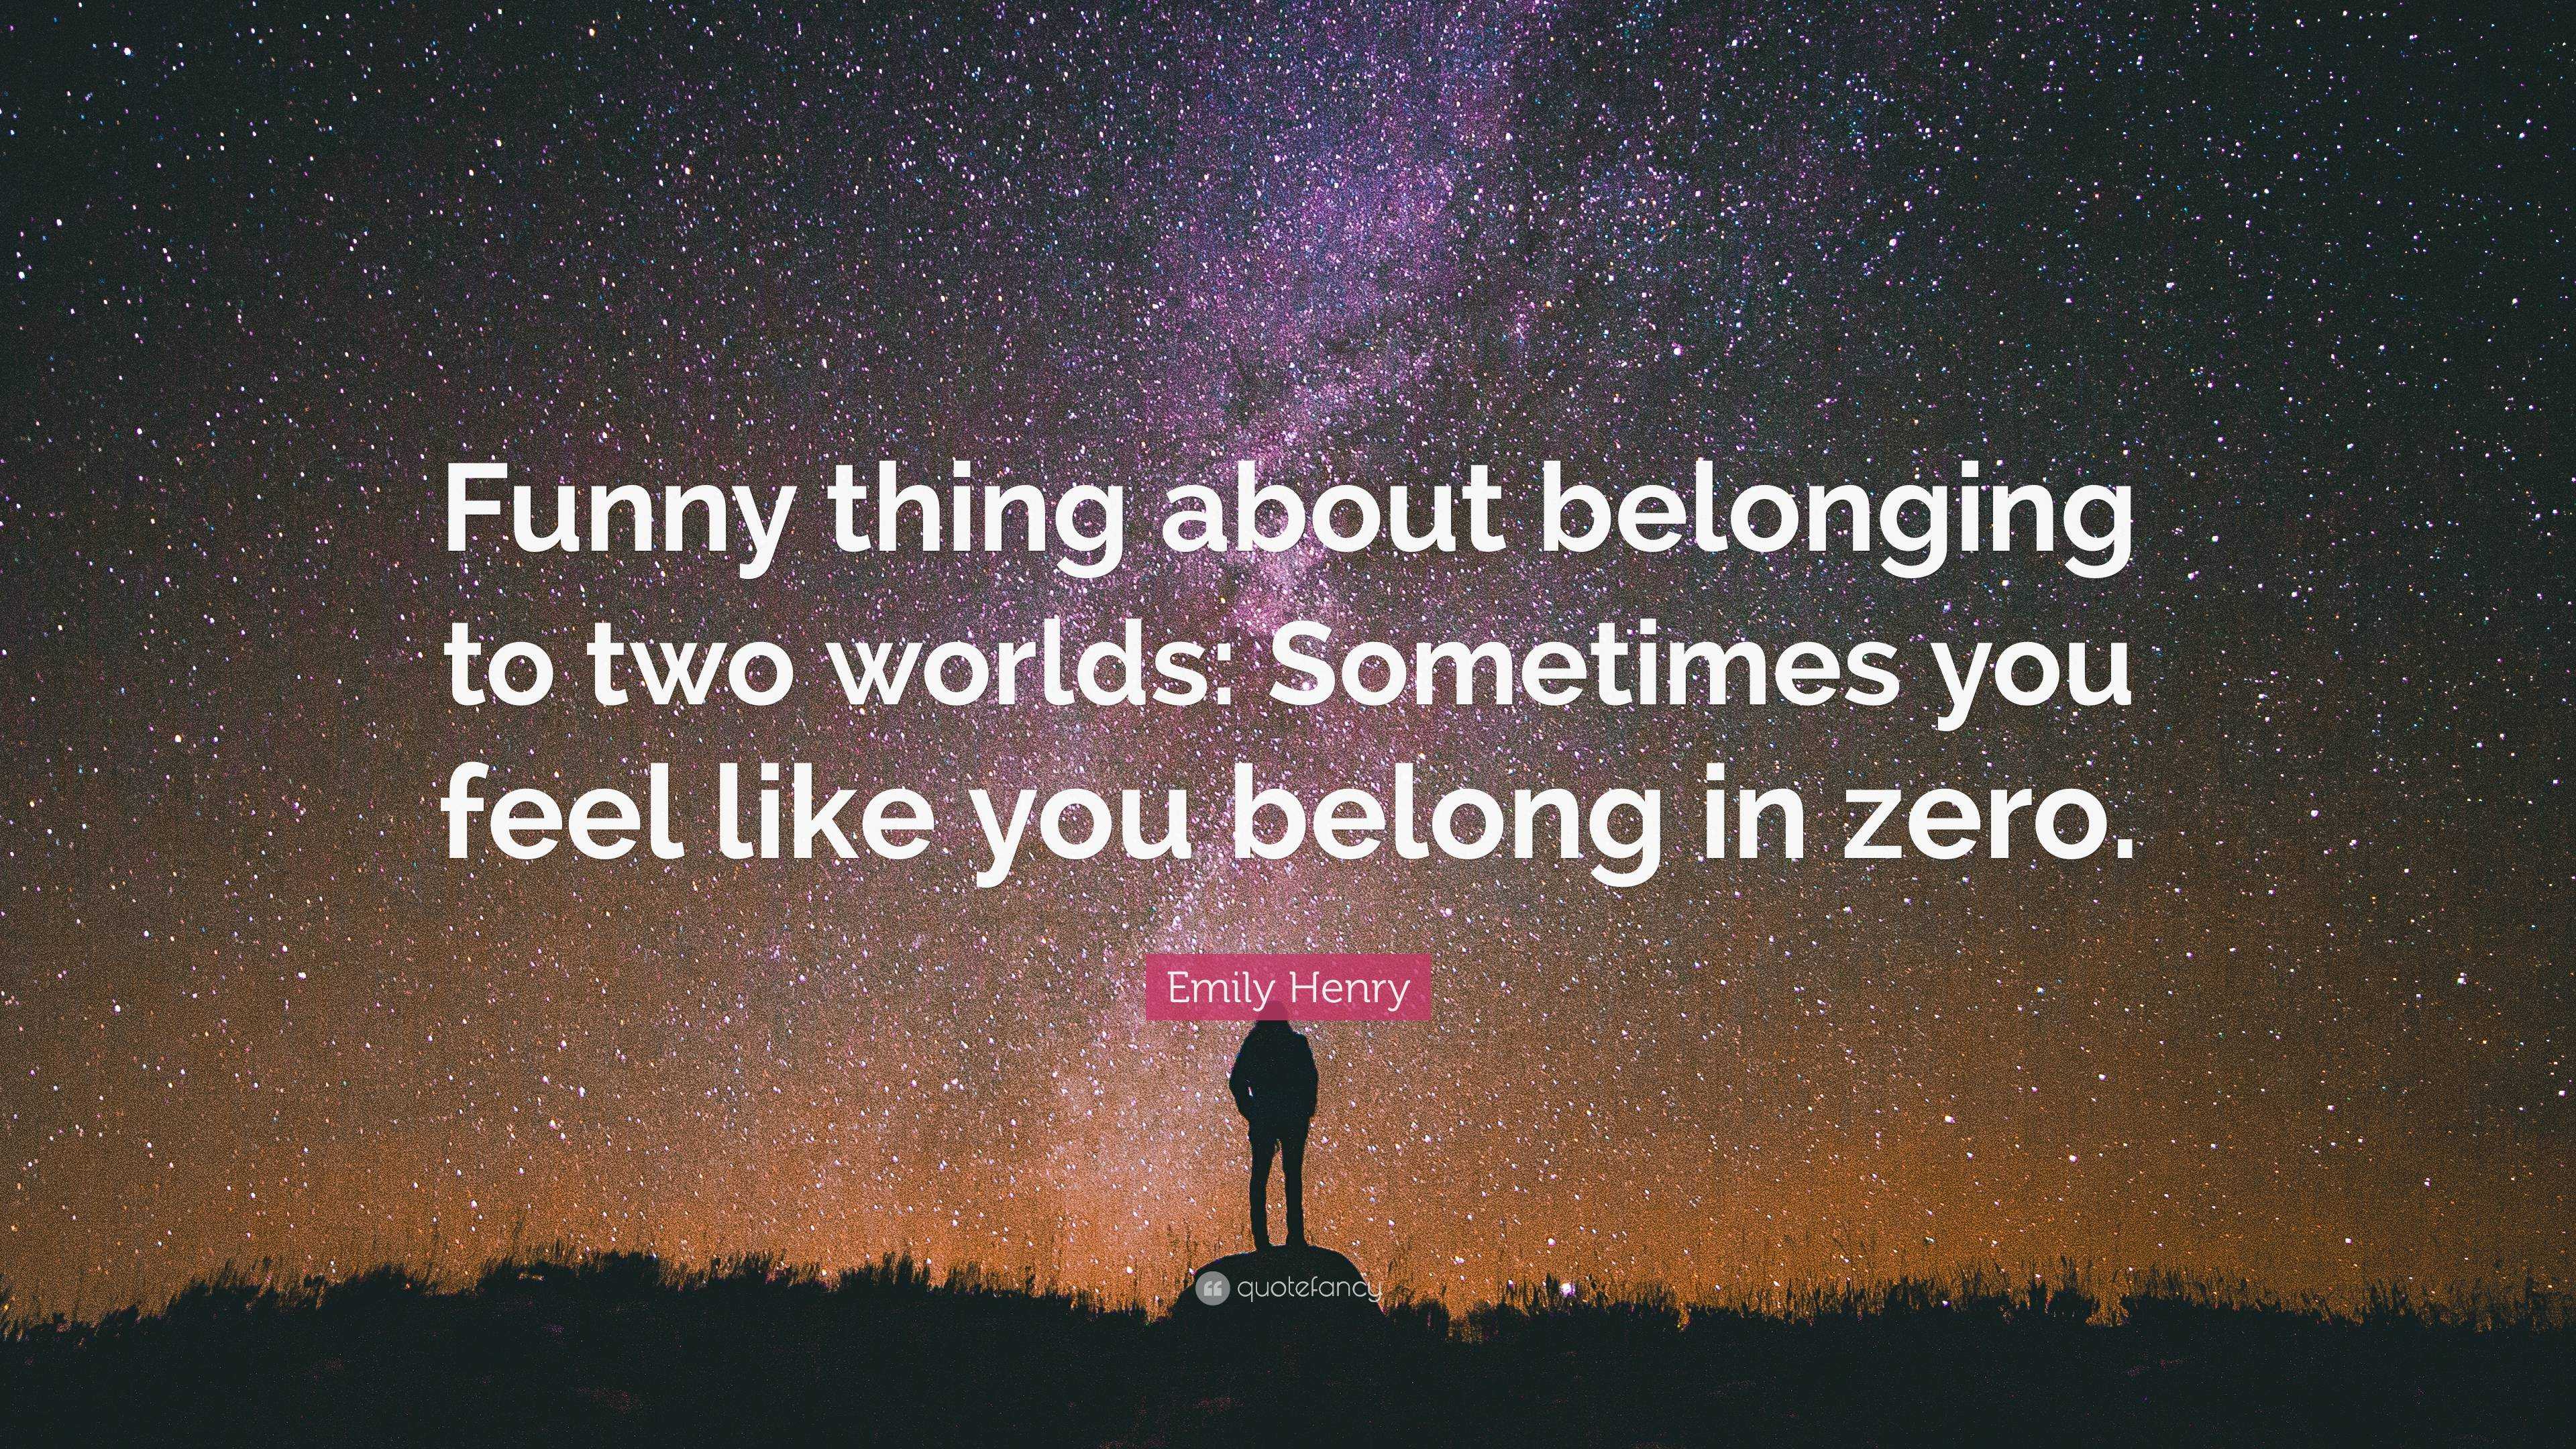 Emily Henry Quote: “Funny thing about belonging to two worlds: Sometimes you  feel like you belong